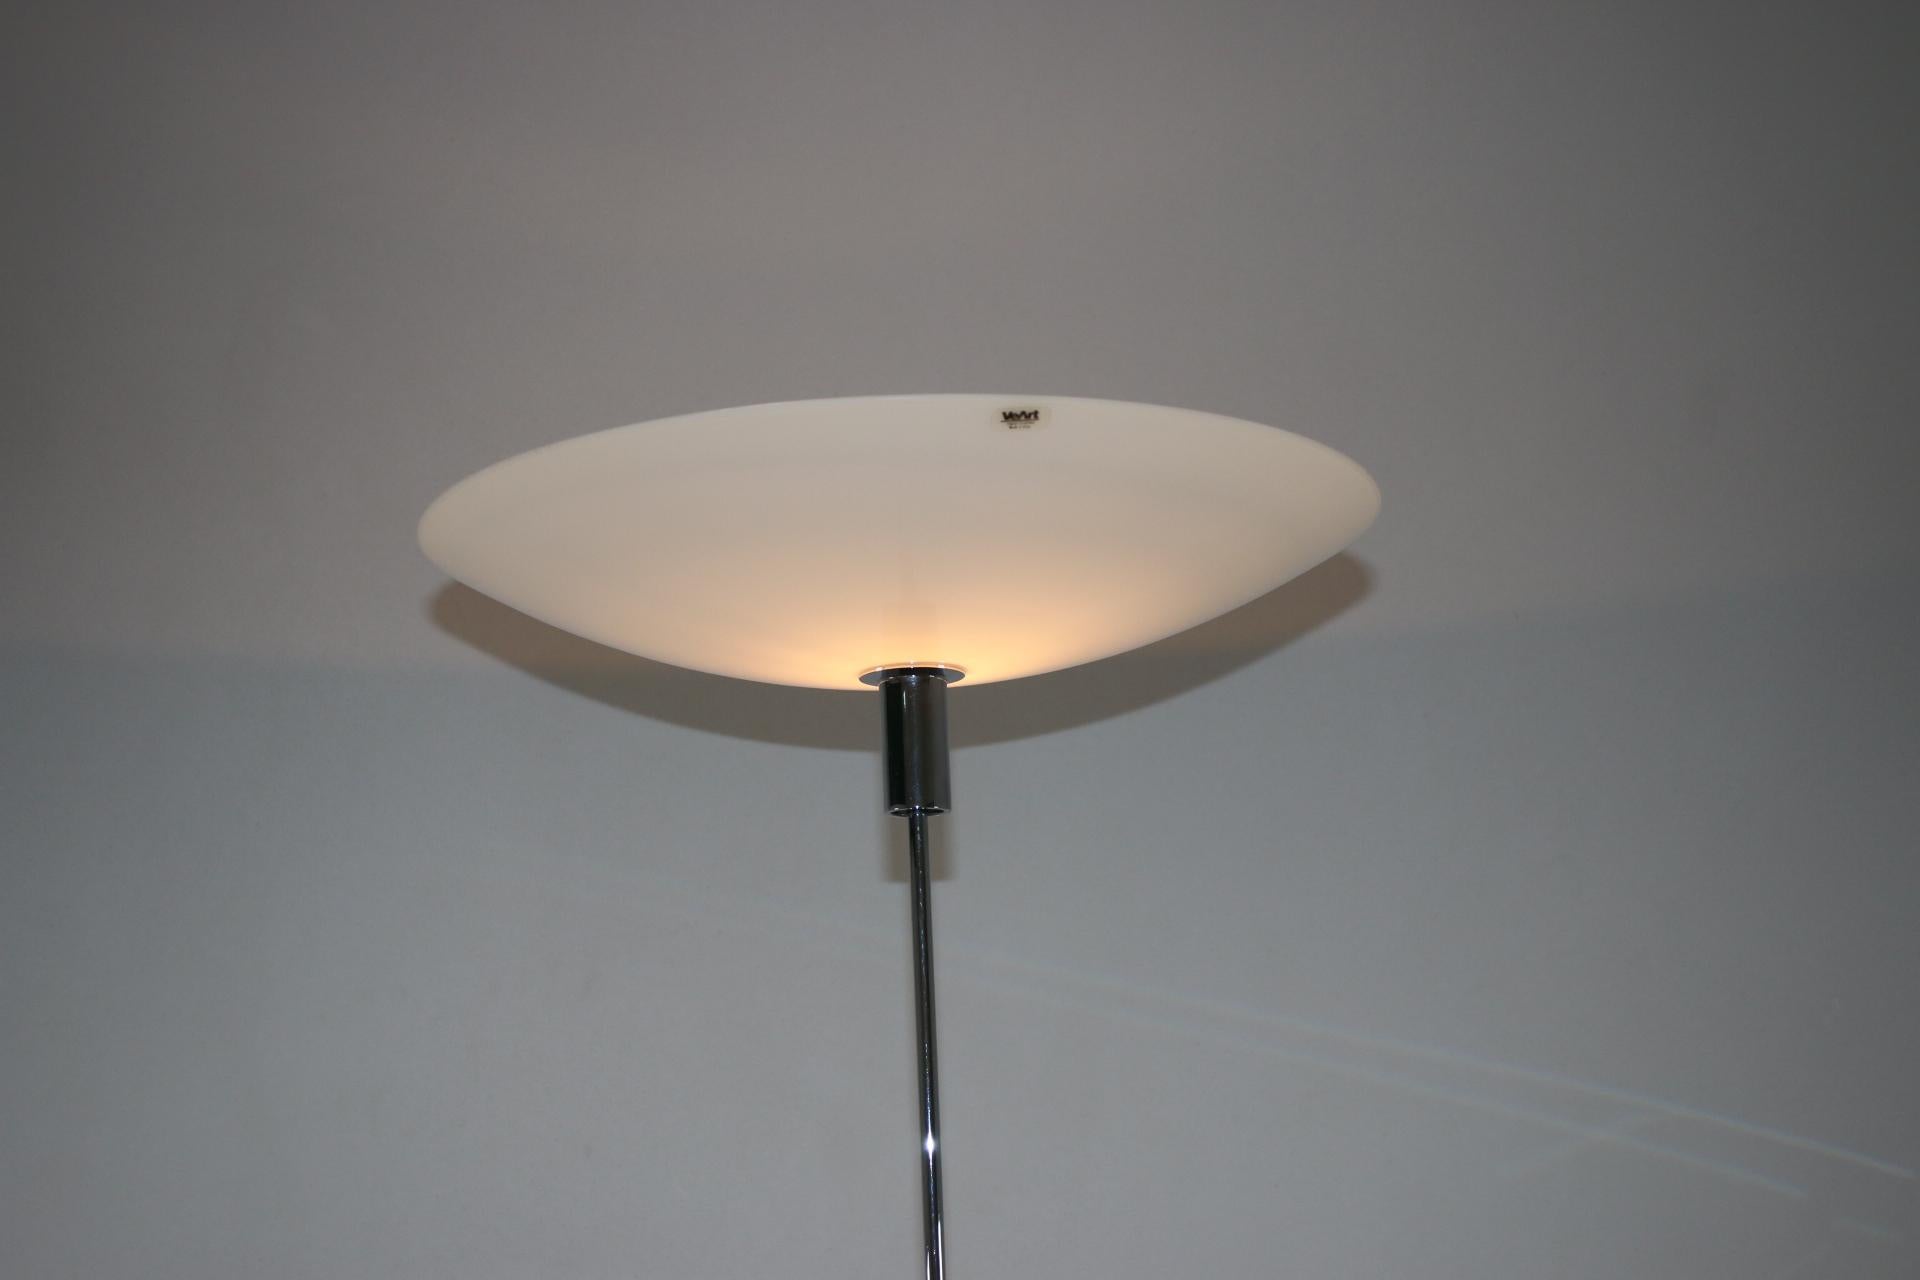 VeArt Italy Artemide Floor Lamp Design by Jeannot Cerutti For Sale 3